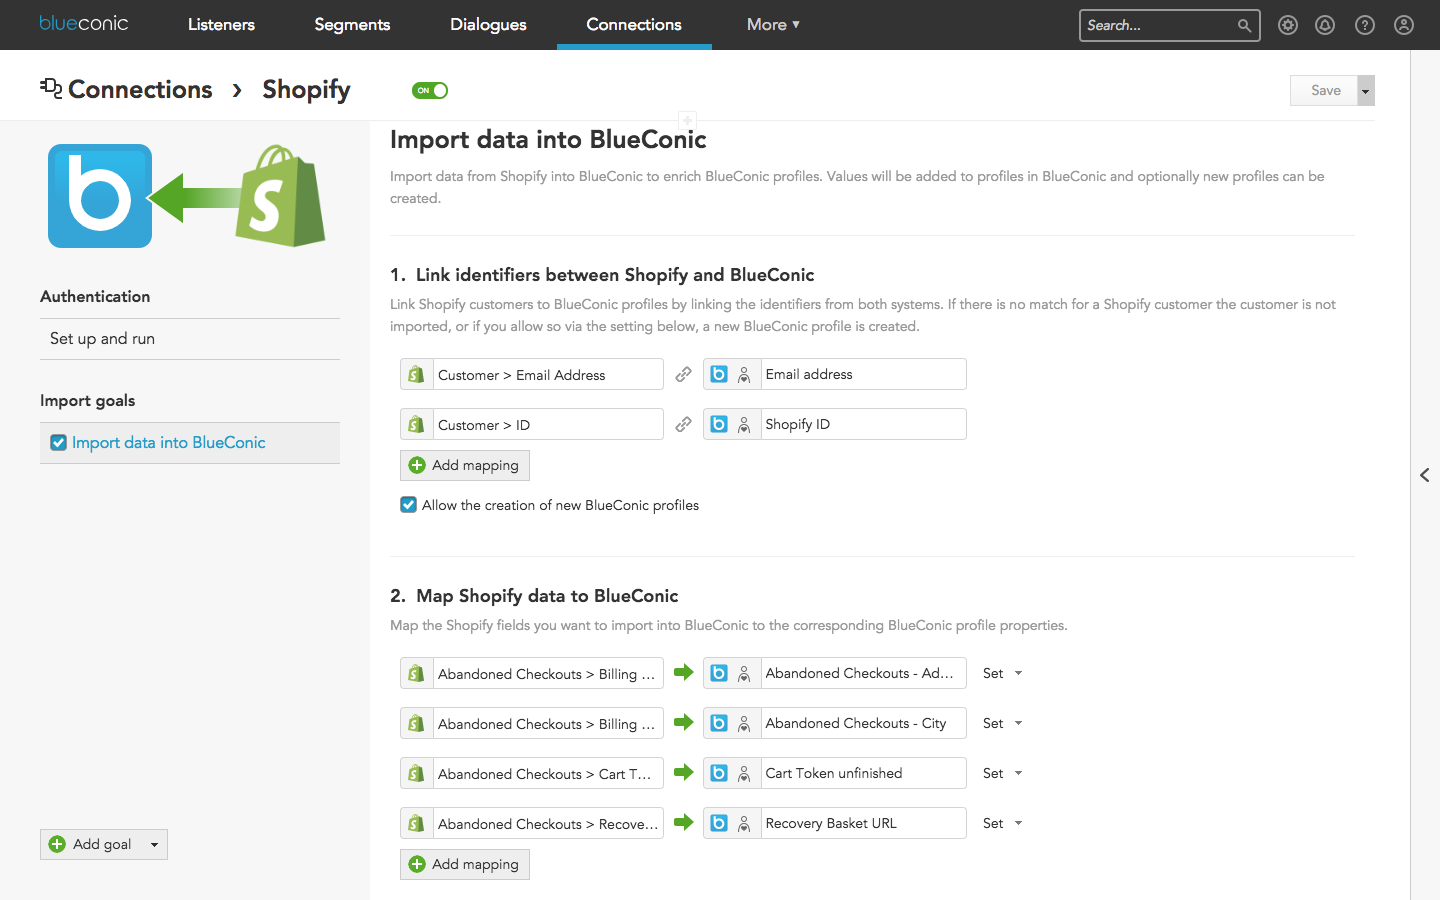 How to import Shopify data into BlueConic to sync order and shopping cart data with BlueConic profiles